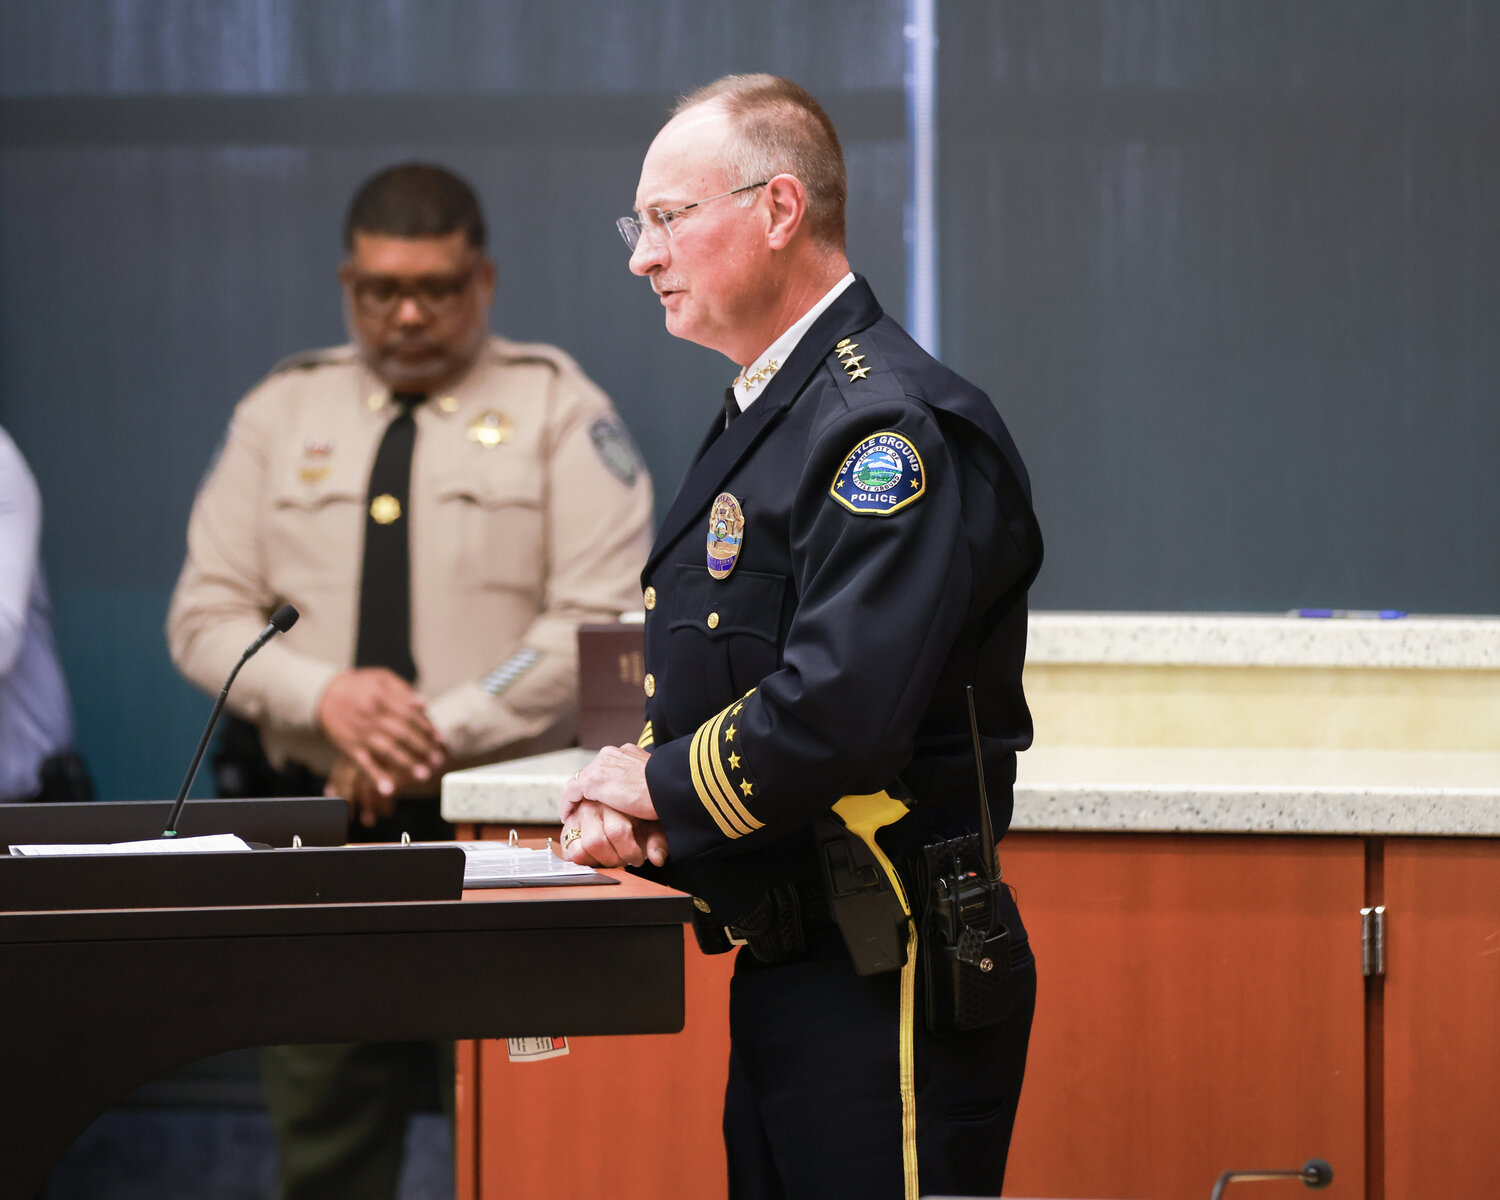 Battle Ground Police Chief Mike Fort reads the "roll call of honor" during the Clark County Law Enforcement Memorial Ceremony at the Public Service Center in Vancouver on Thursday, May 18, 2023